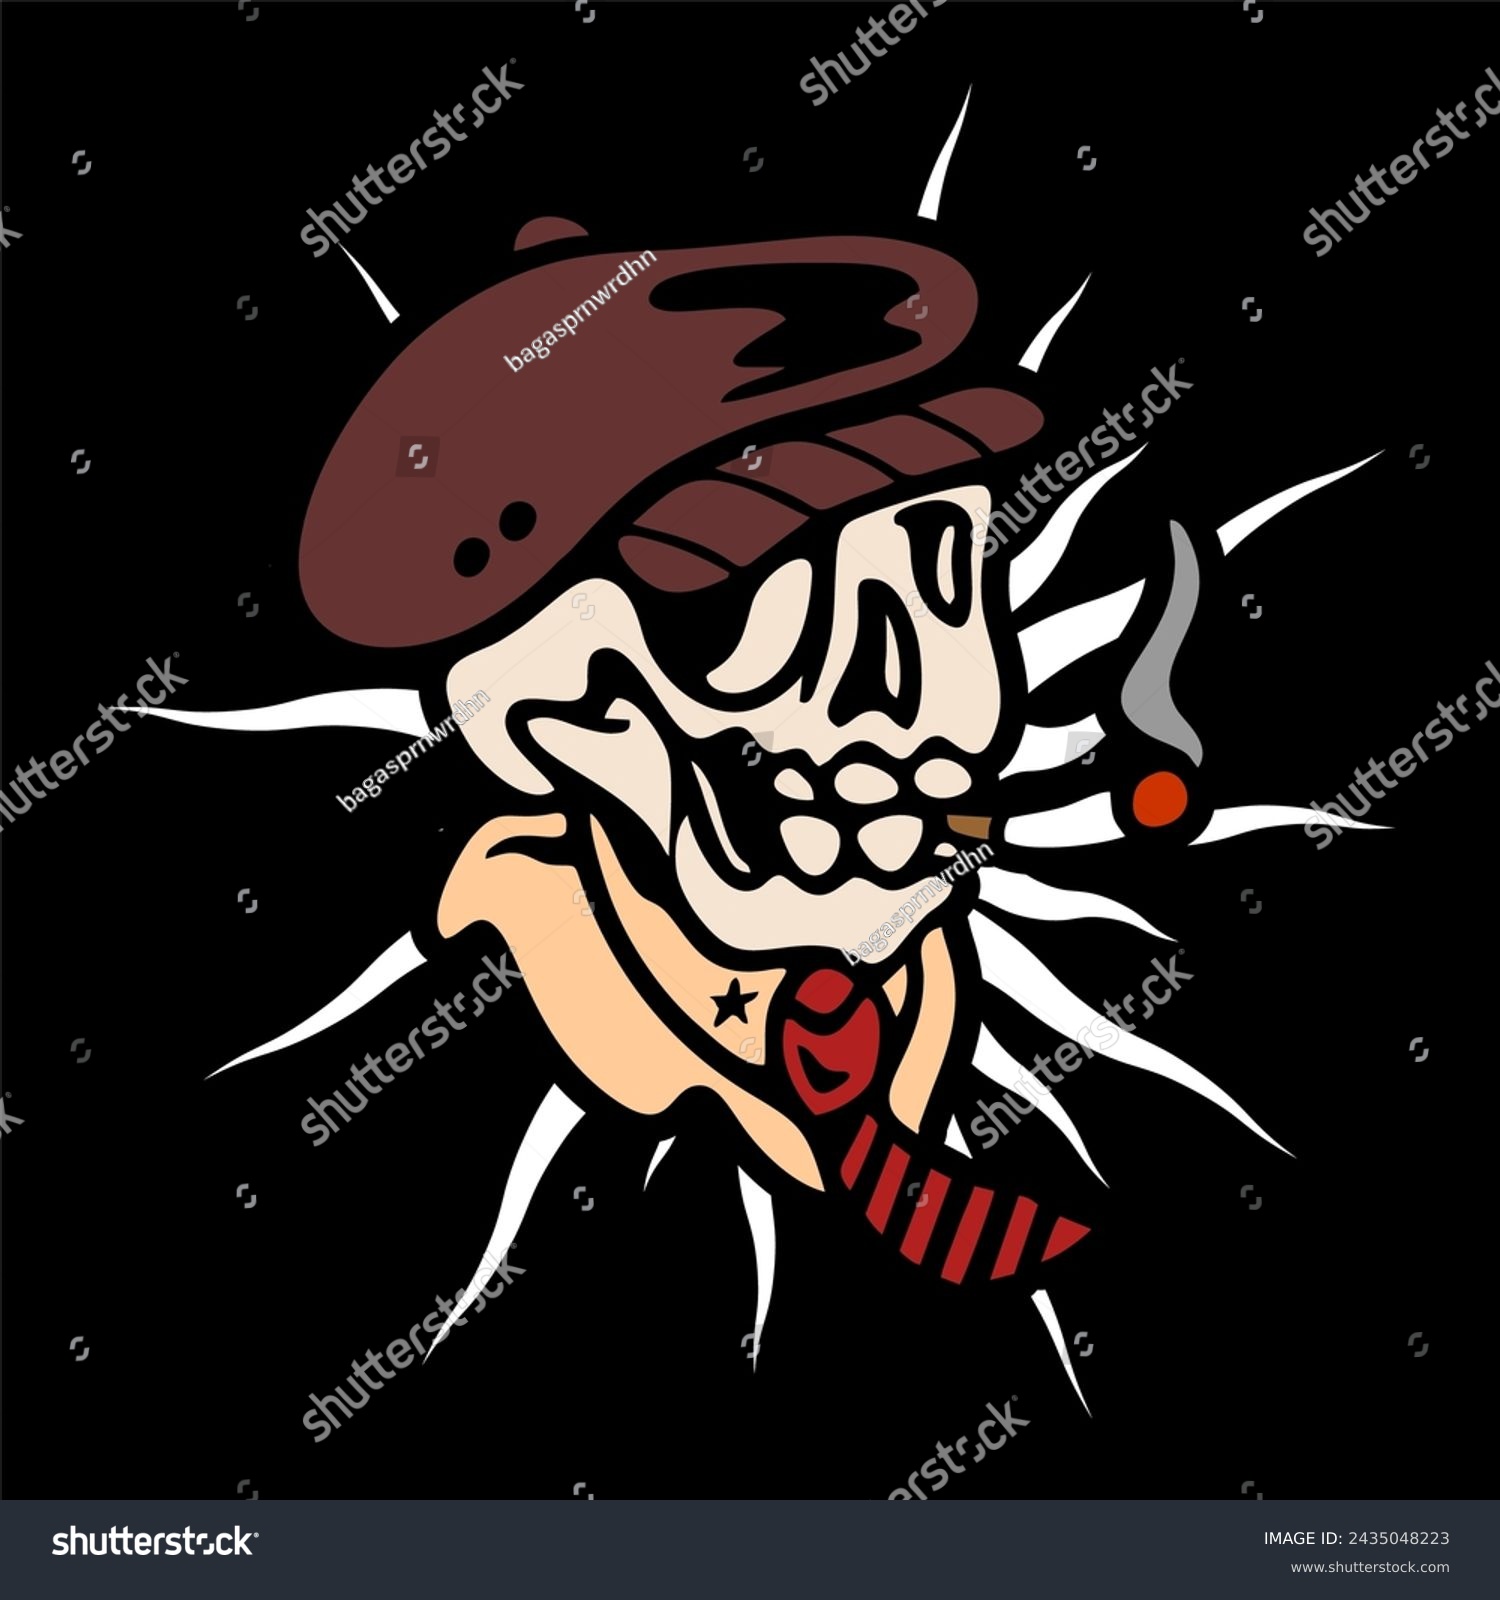 SVG of vector illustration artwork of skeleton skull head wearing flat cap classic hat with tie and smoking cigarette.Can be used as Logo, Brands, Mascots, tshirt, sticker,patch and Tattoo design.
 svg